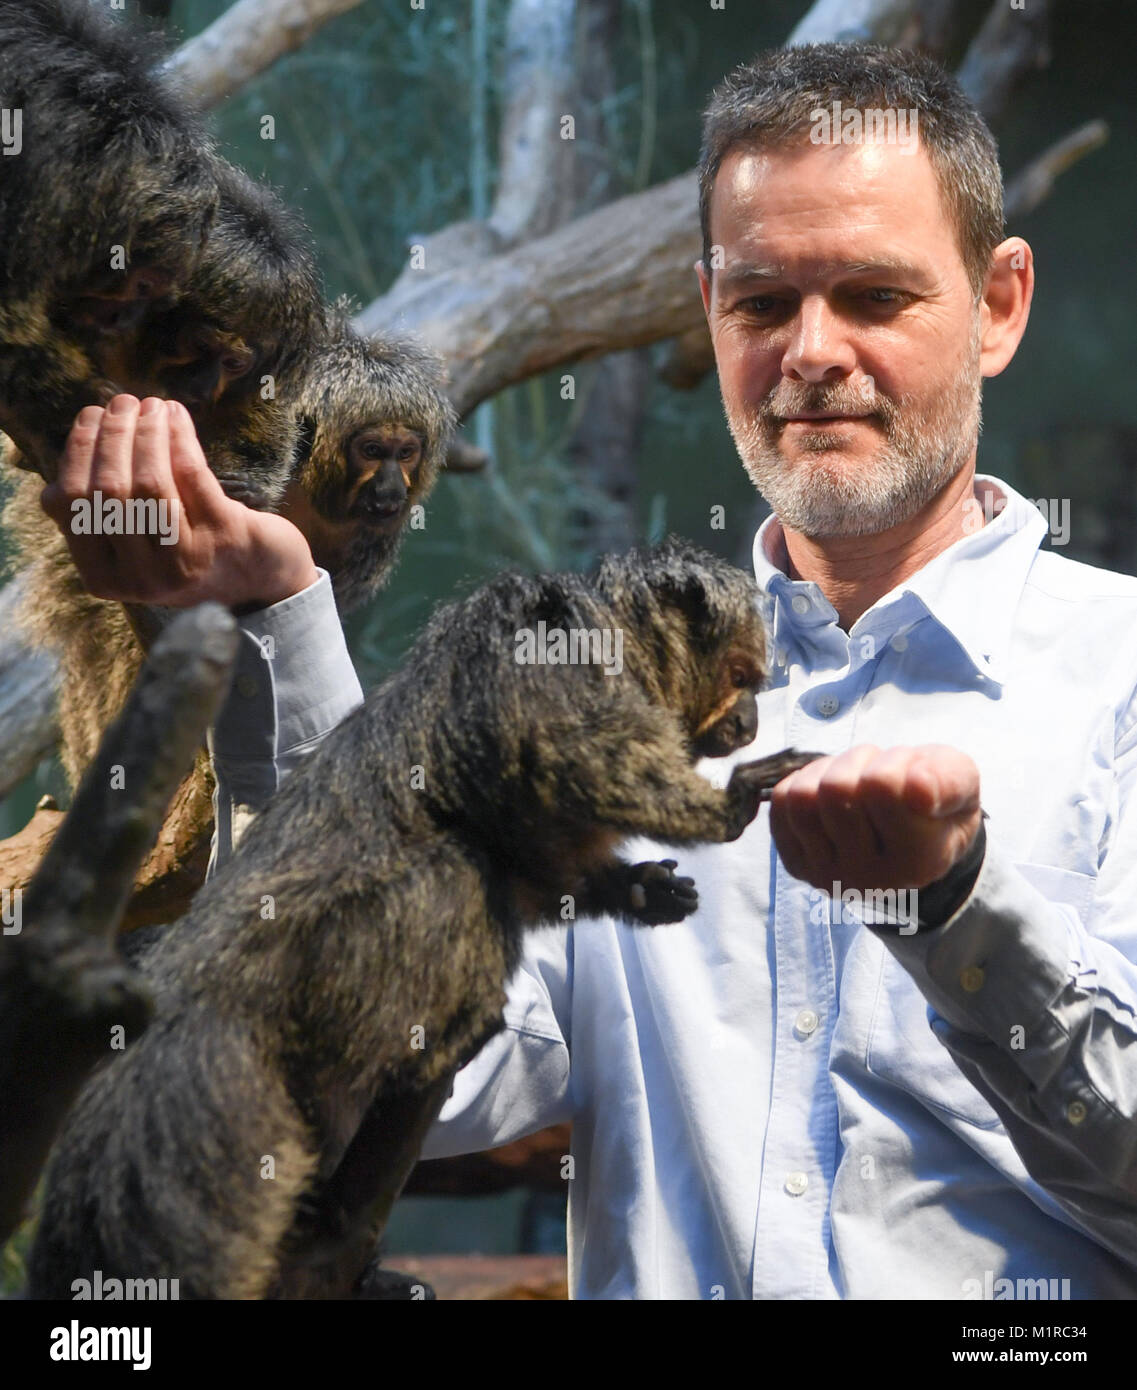 Frankfurt am Main, Germany. 19th Jan, 2018. The Spaniard Miguel Casares, designated director of the Frankfurt Zoo feeds White-faced sakis in their cage in Frankfurt am Main, Germany, 19 January 2018. The 51 year old veterinarian will take over as head of the Frankfurt Zoo, which is steeped in tradition, in February 2018. Credit: Arne Dedert/dpa/Alamy Live News Stock Photo